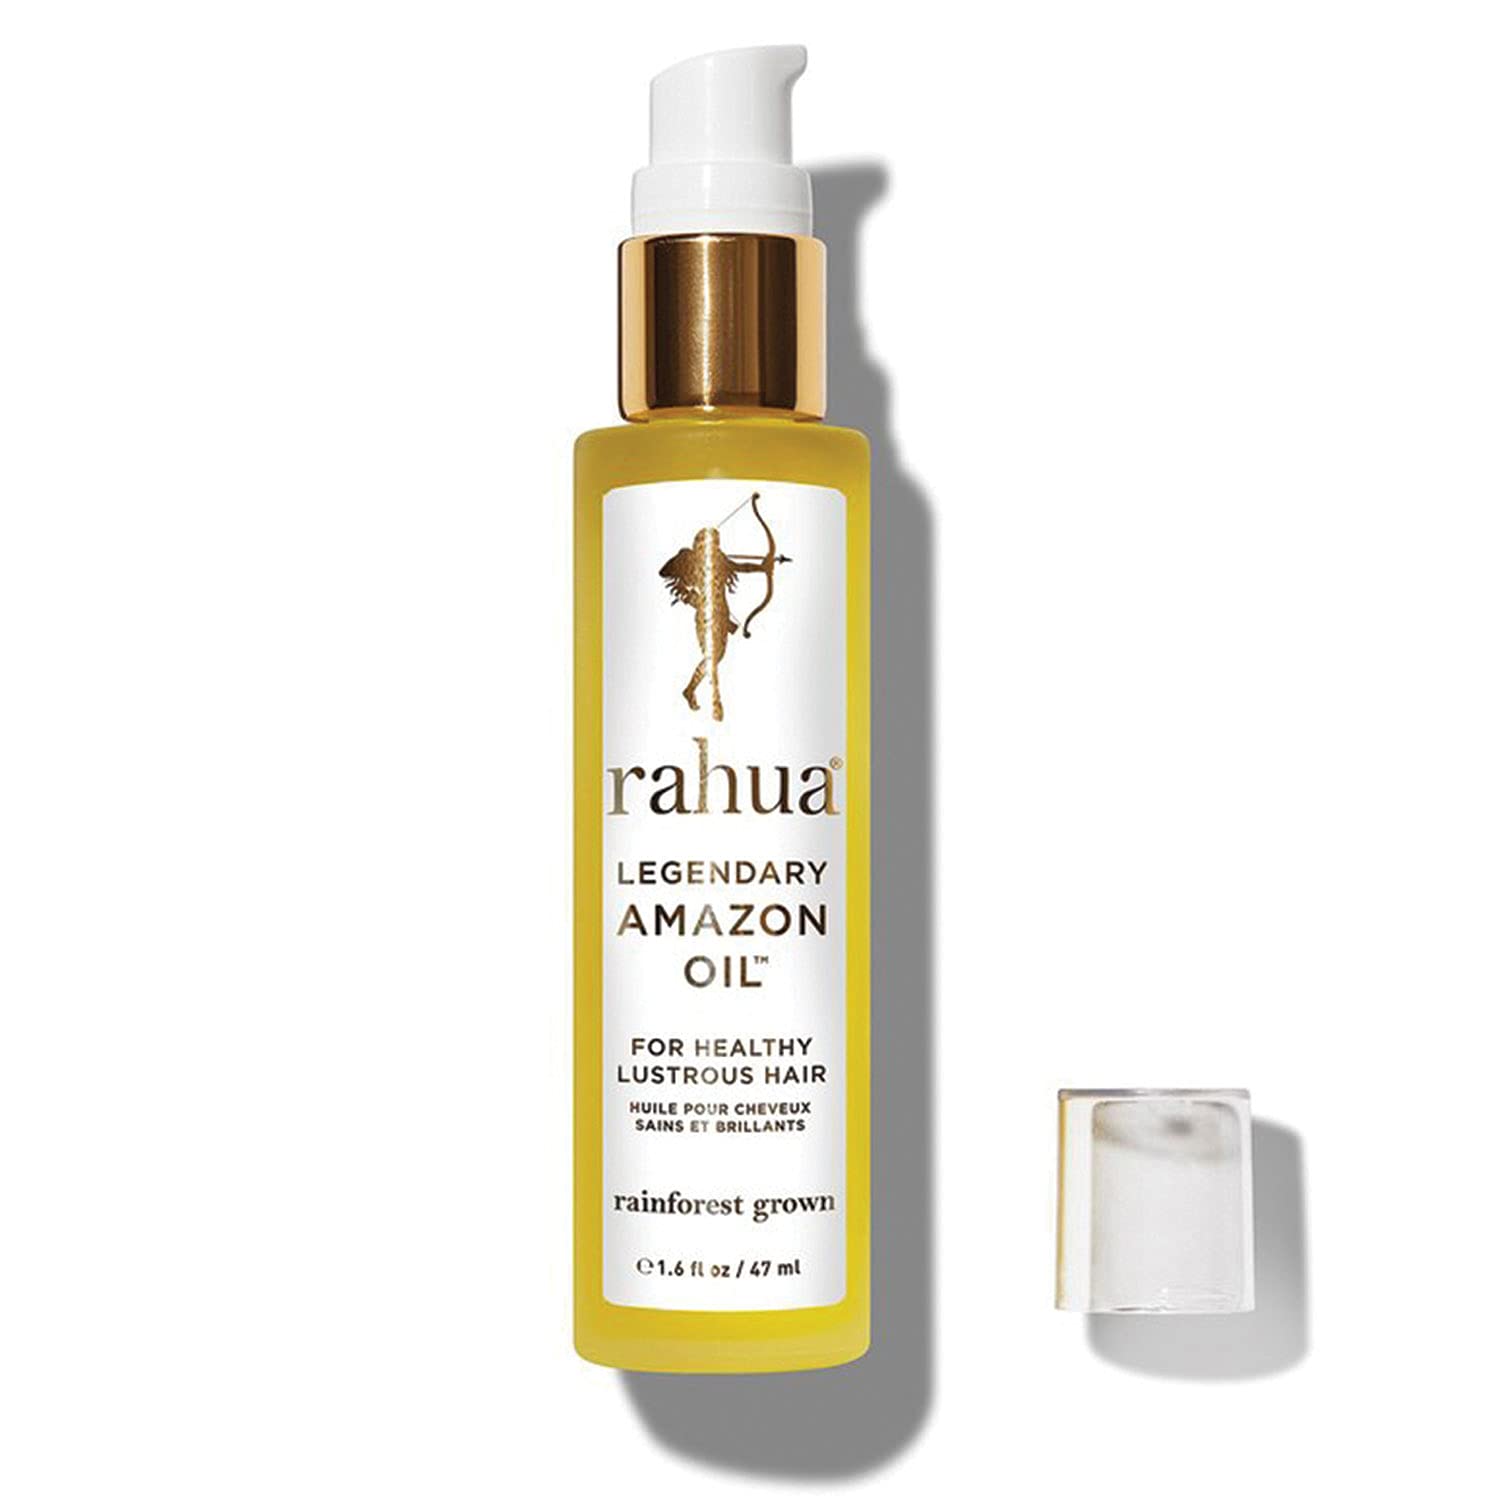 Rahua Legendary Amazon Oil , 1.6 Fl Oz, Organic Lightweight Plant Based Nourishing Shine Oil to Prevent Frizz and Flyaways split ends and Nourish and Strengthen Hair, Best for All Hair Types